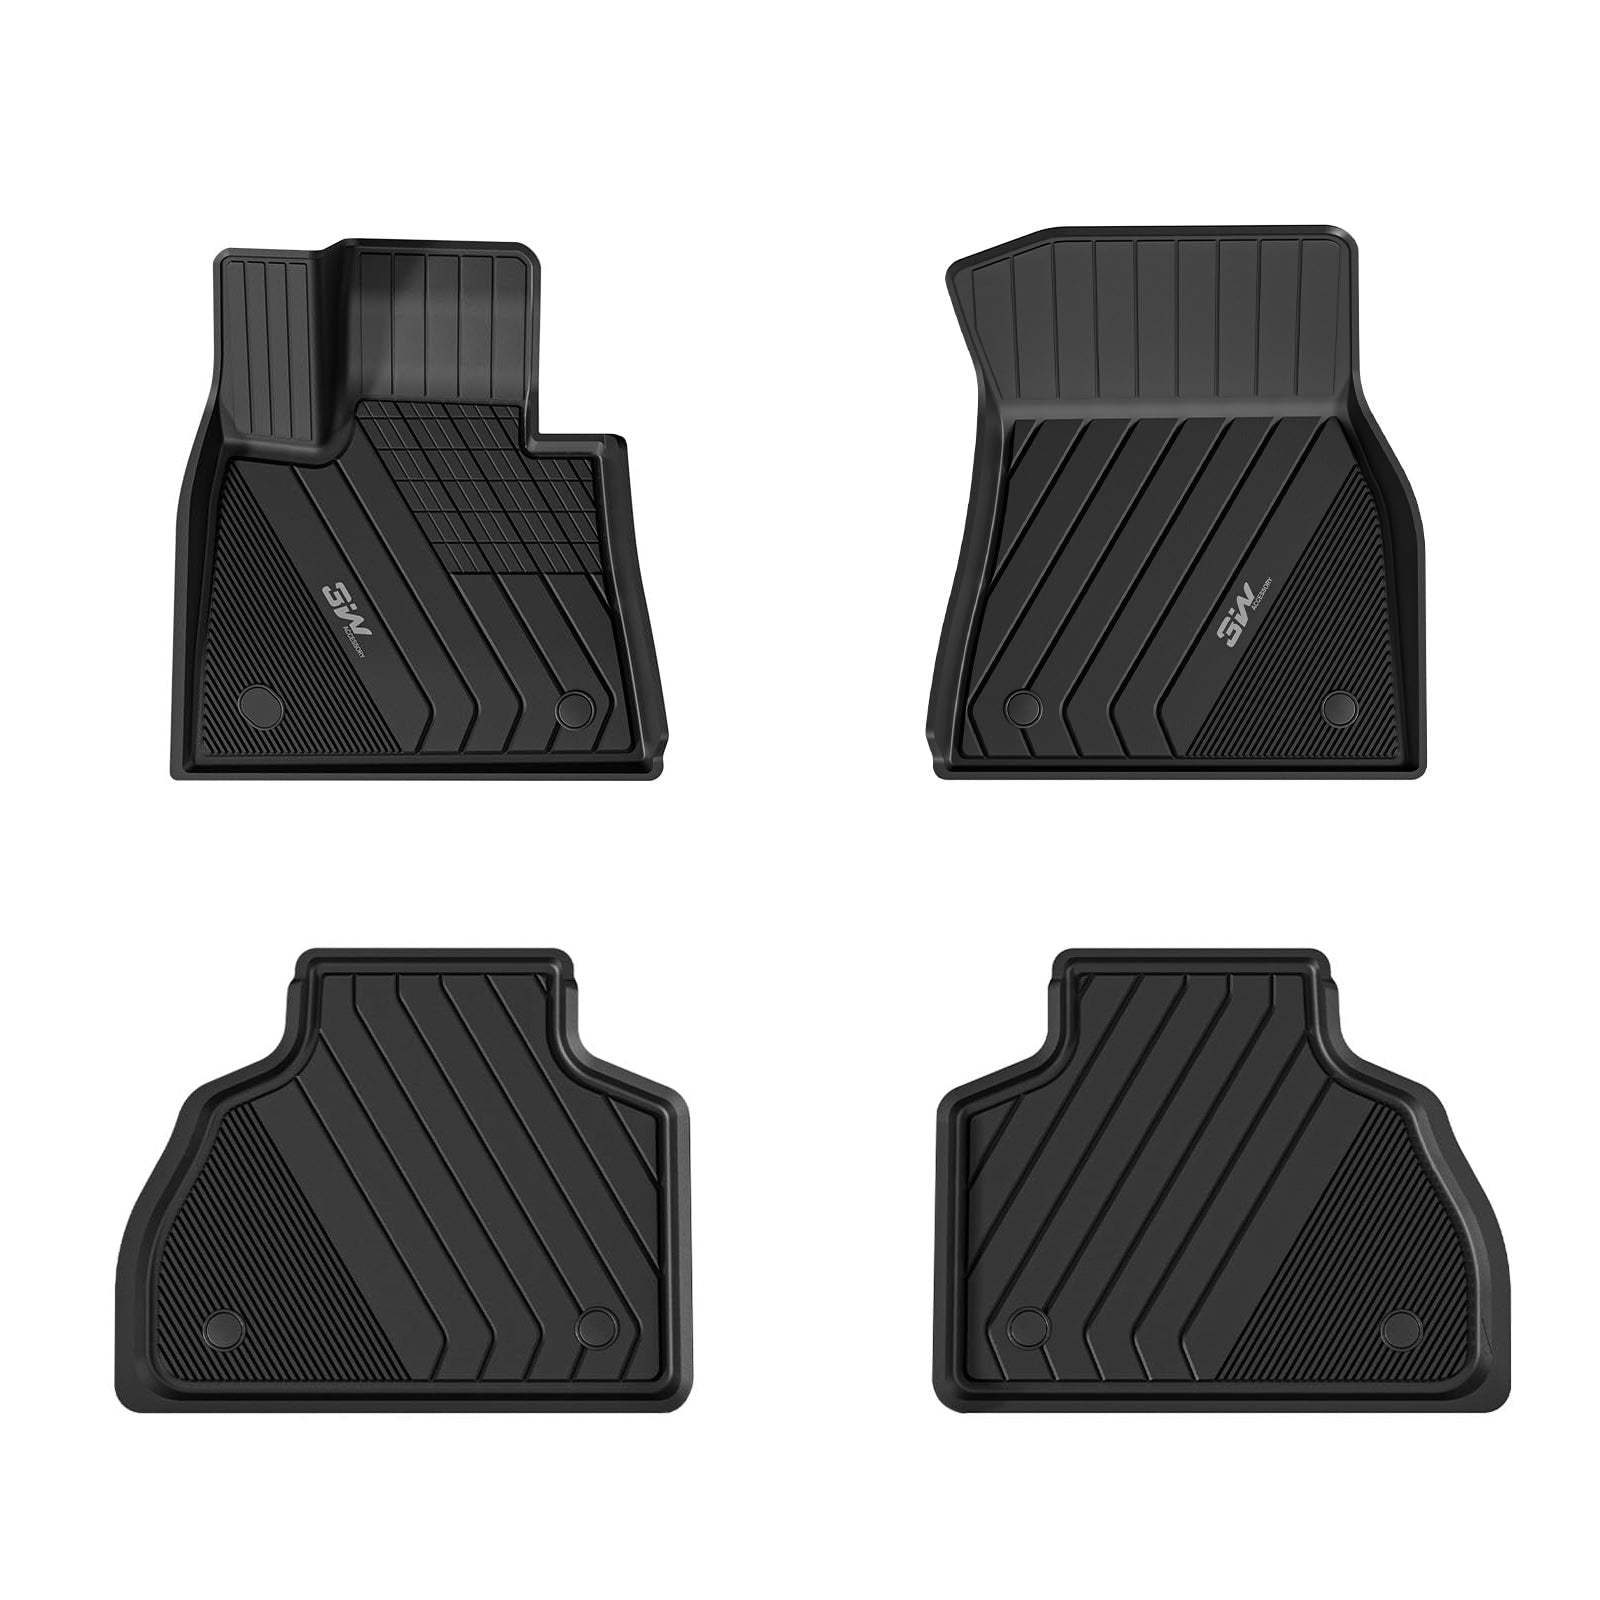 3W BMW X7 2020-2023 6 Seats Custom Floor Mats TPE Material & All-Weather Protection Vehicles & Parts 3Wliners 2020-2023 6-Seat X7 1st&2nd Row Mats